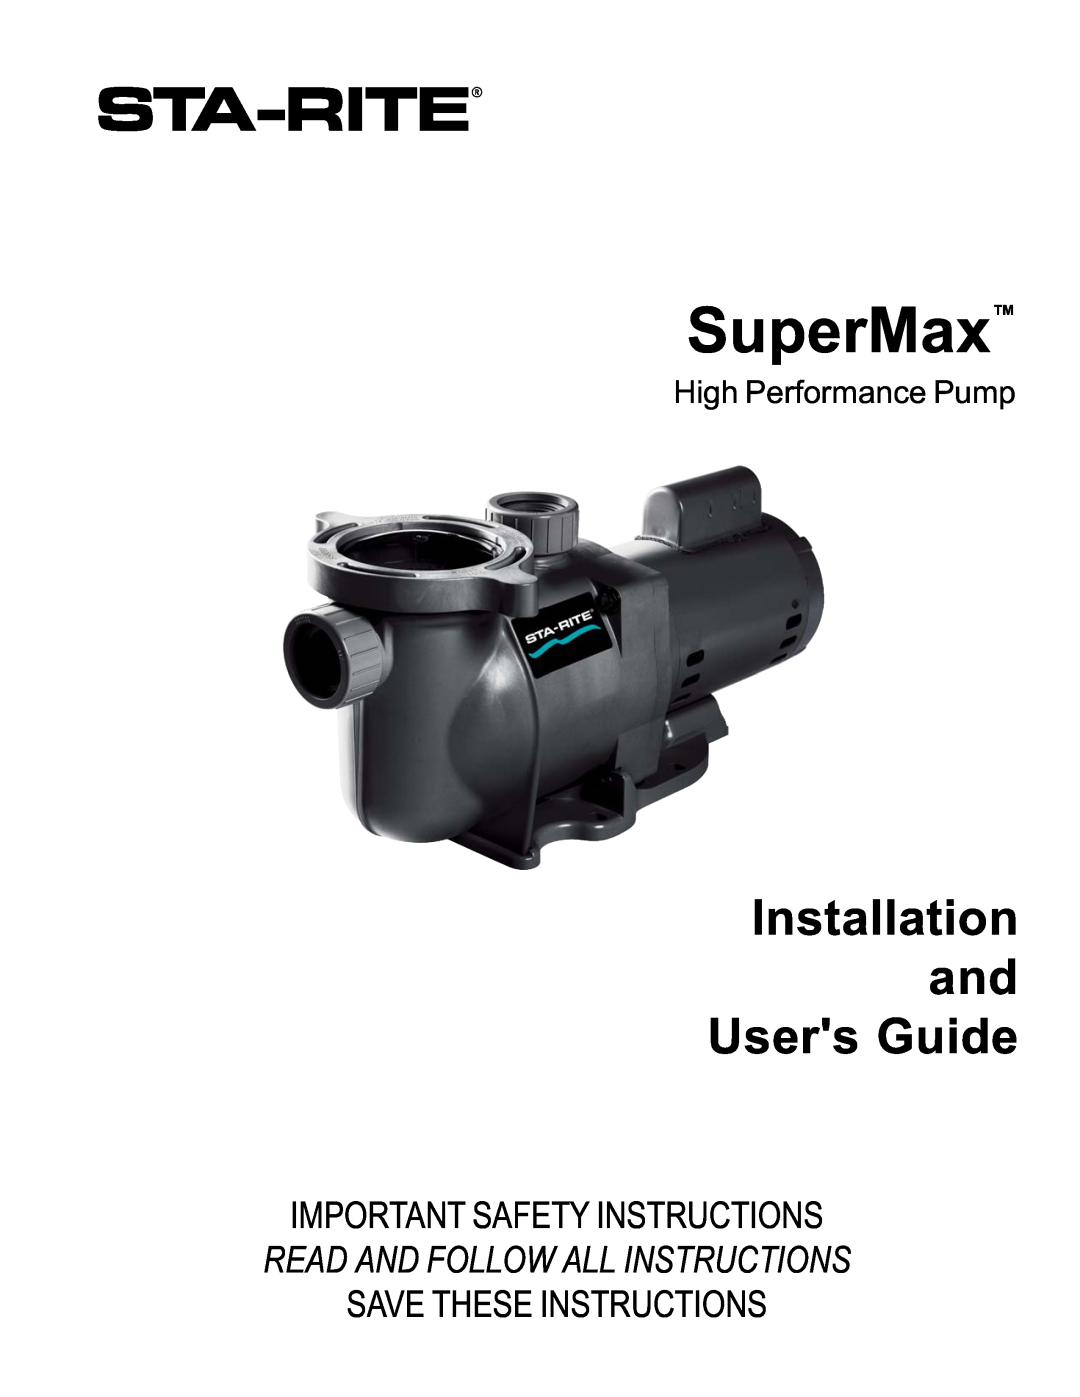 Pentair SuperMax important safety instructions High Performance Pump, Installation and Users Guide 